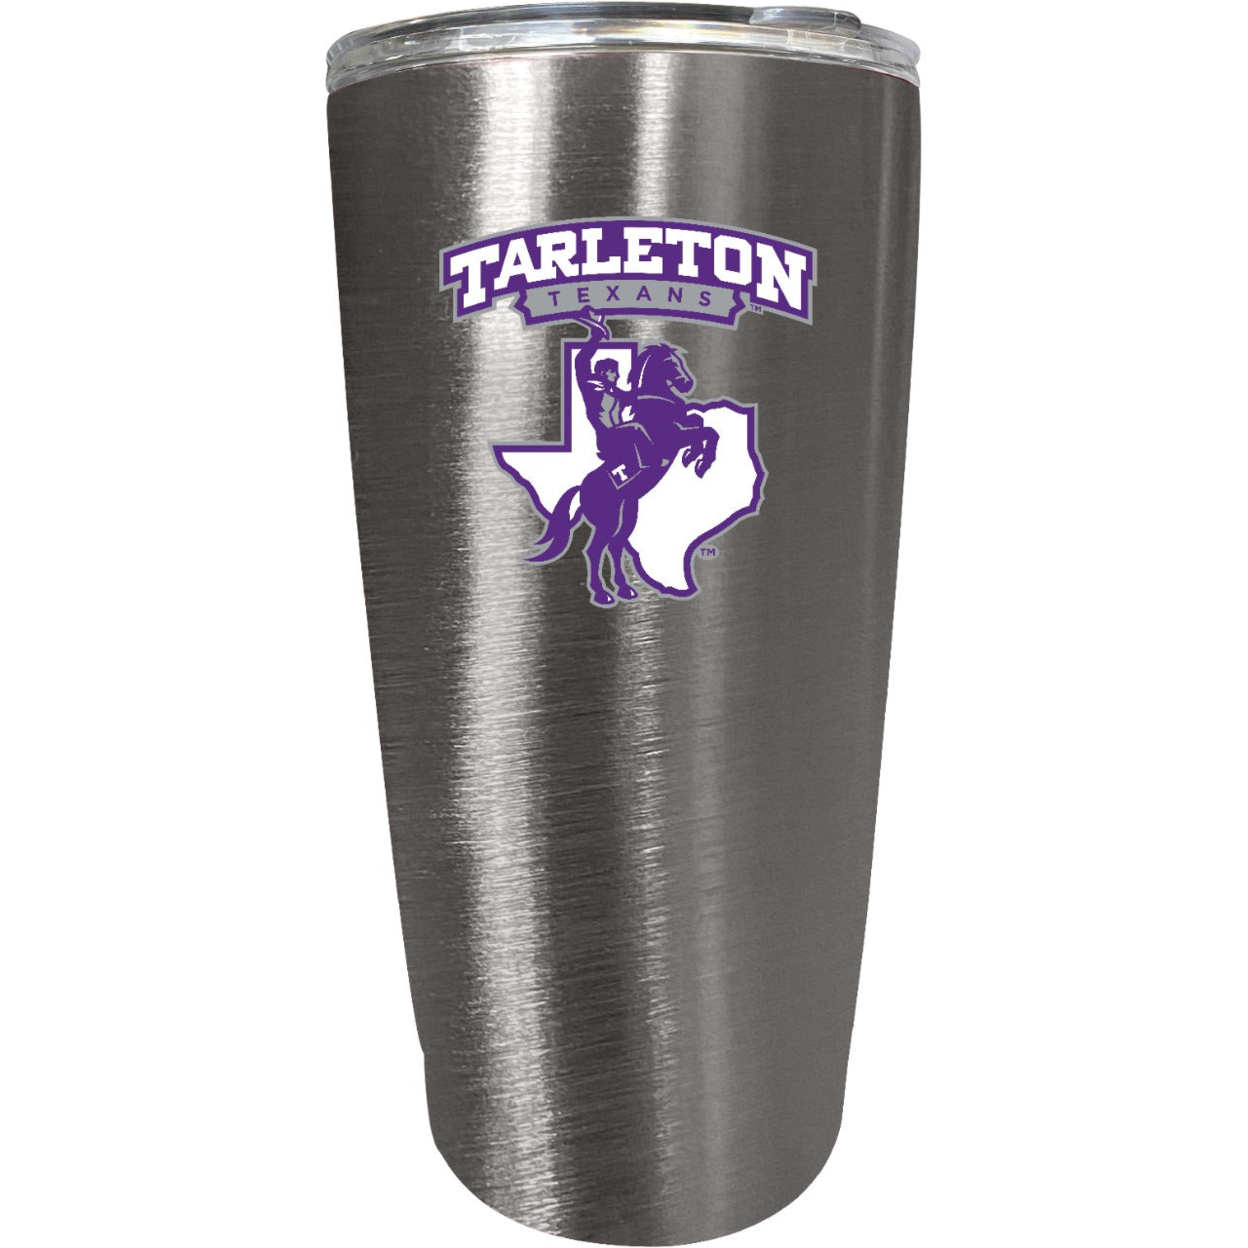 Tarleton State University 16 Oz Insulated Stainless Steel Tumbler Colorless